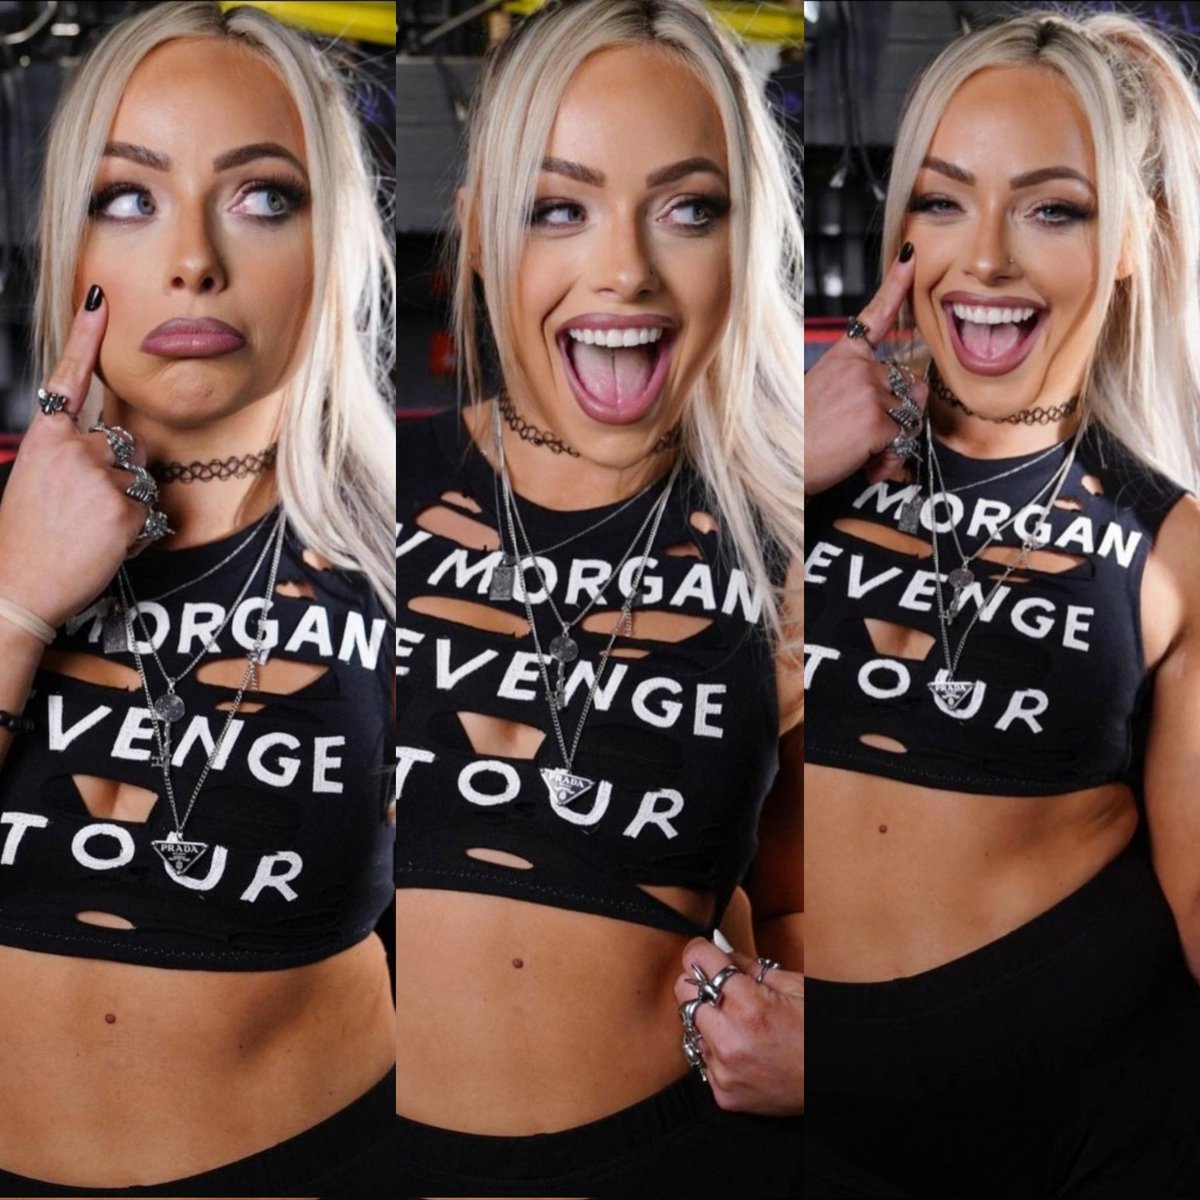 Digitals and pics of Liv Morgan from Raw ❣️📸

Things are heating up on the Raw roster 🔥